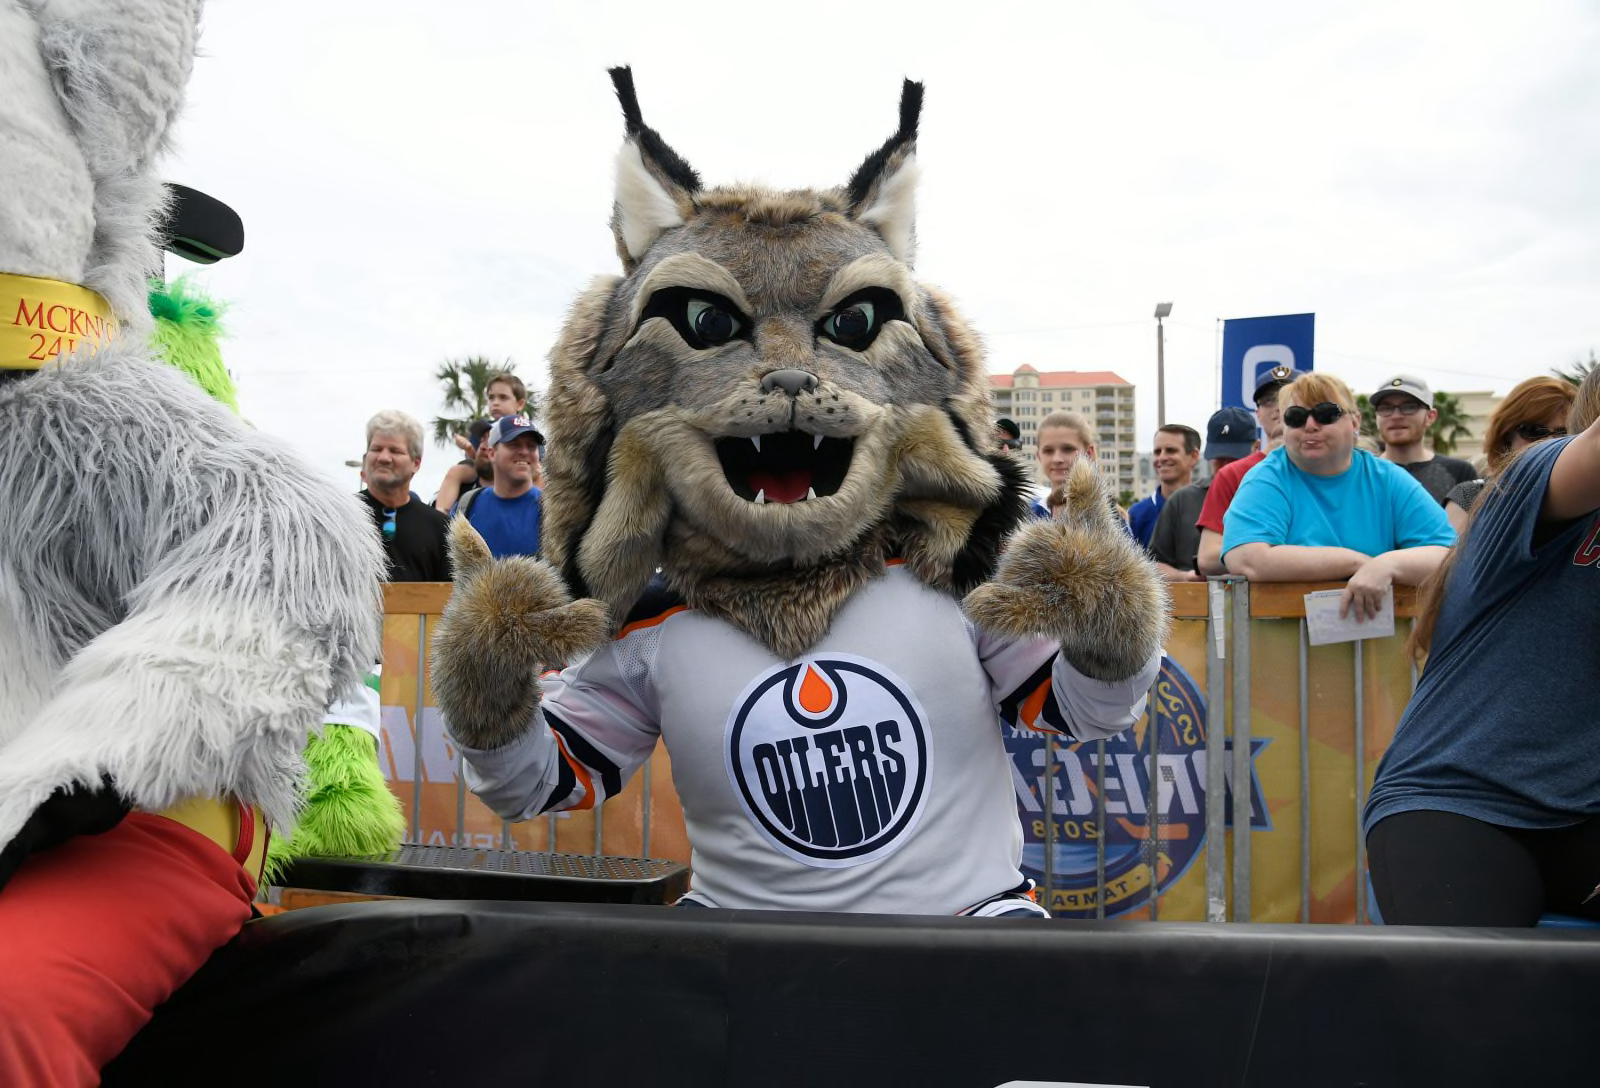 NHL Power Rankings: Ranking each mascot from worst to best